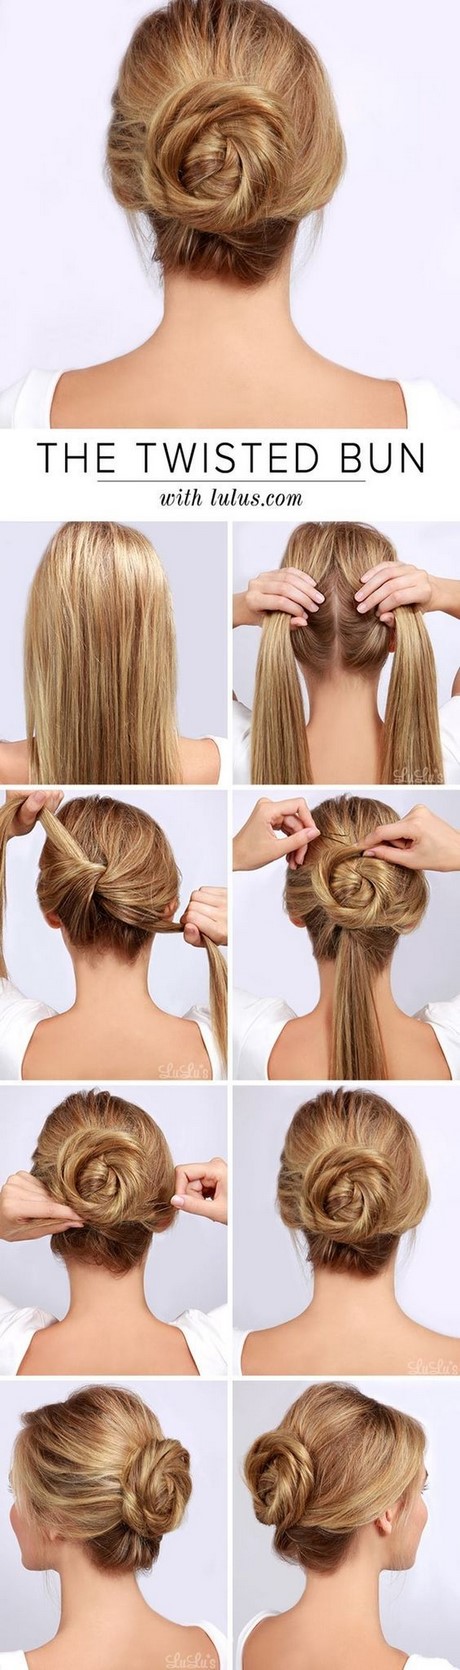 easy-and-good-looking-hairstyles-83_13 Лесни и красиви прически